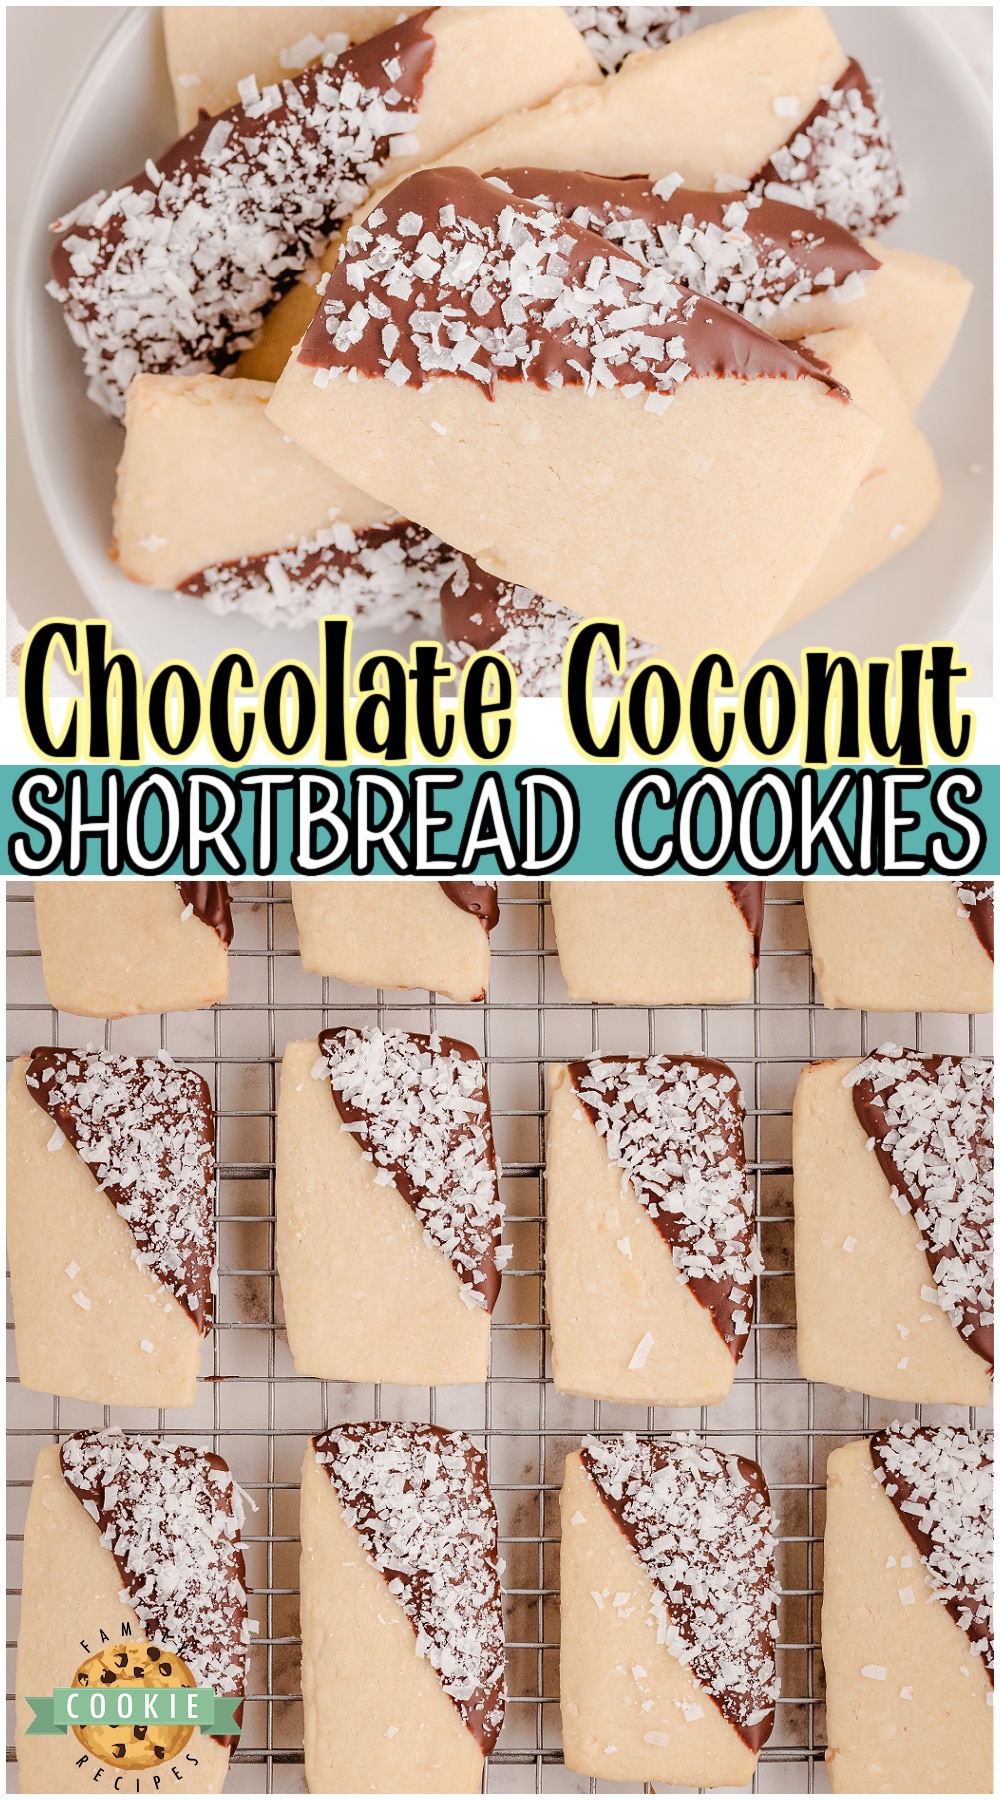 Coconut shortbread cookies are buttery, crisp shortbread cookies with fantastic coconut flavor! They're dipped in chocolate & dusted with more coconut for a delicious cookie combination. via @buttergirls